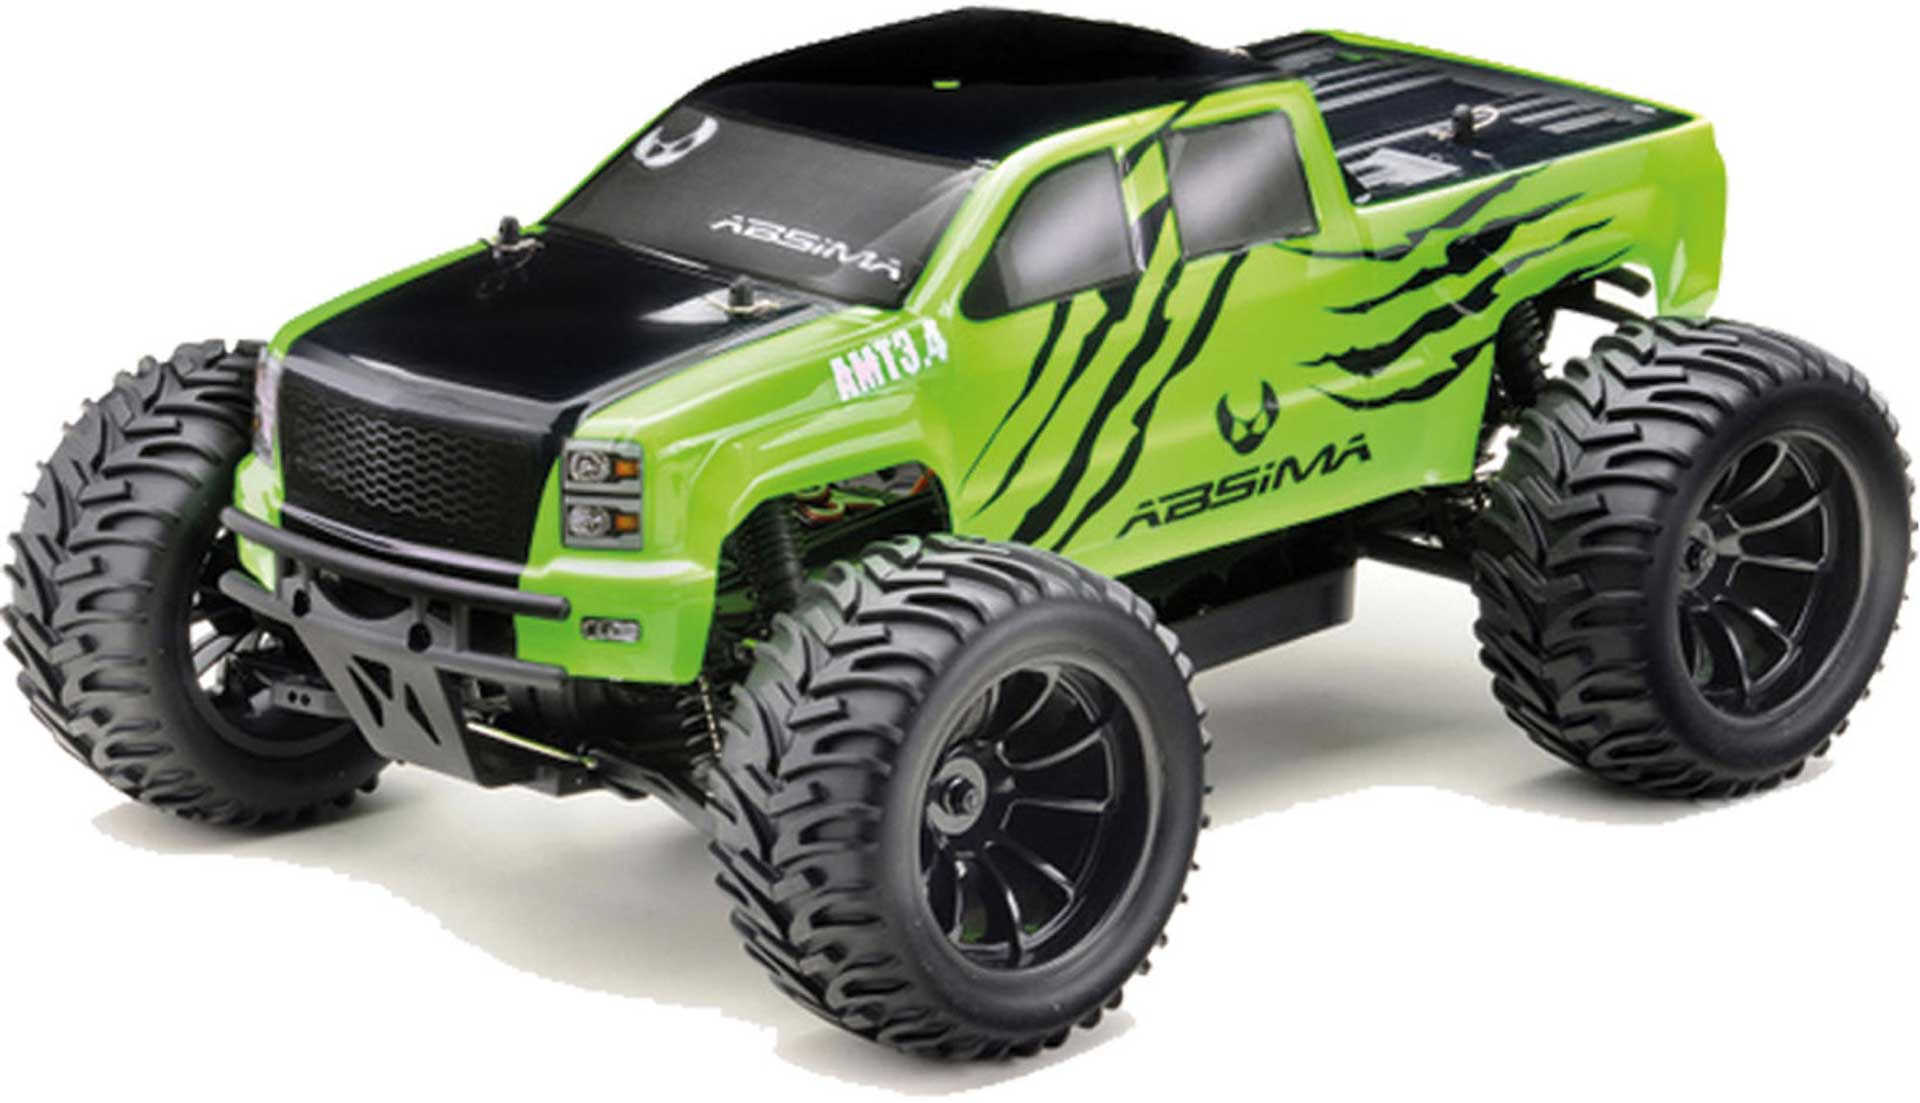 ABSIMA AMT3.4 MONSTER TRUCK RTR+BATTERY & CHARGER 4WD 1/10